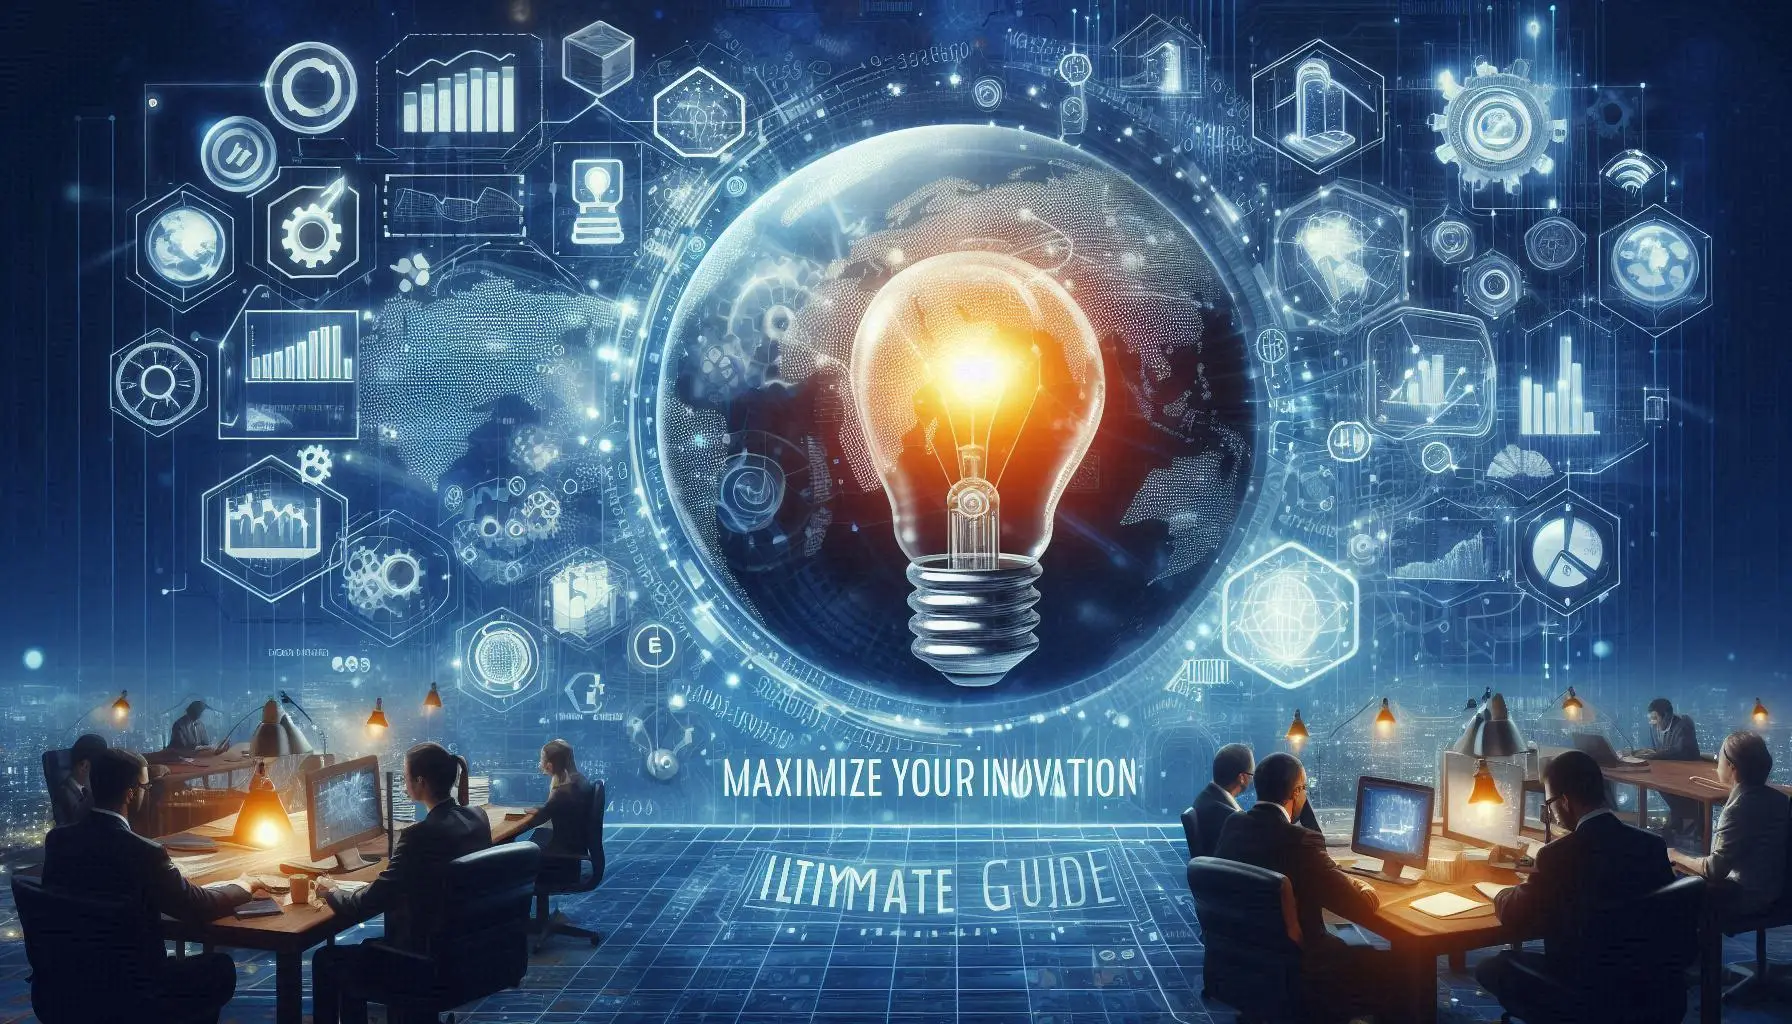 Maximize Your Innovation-Ultimate Guide to Protecting Intellectual Property